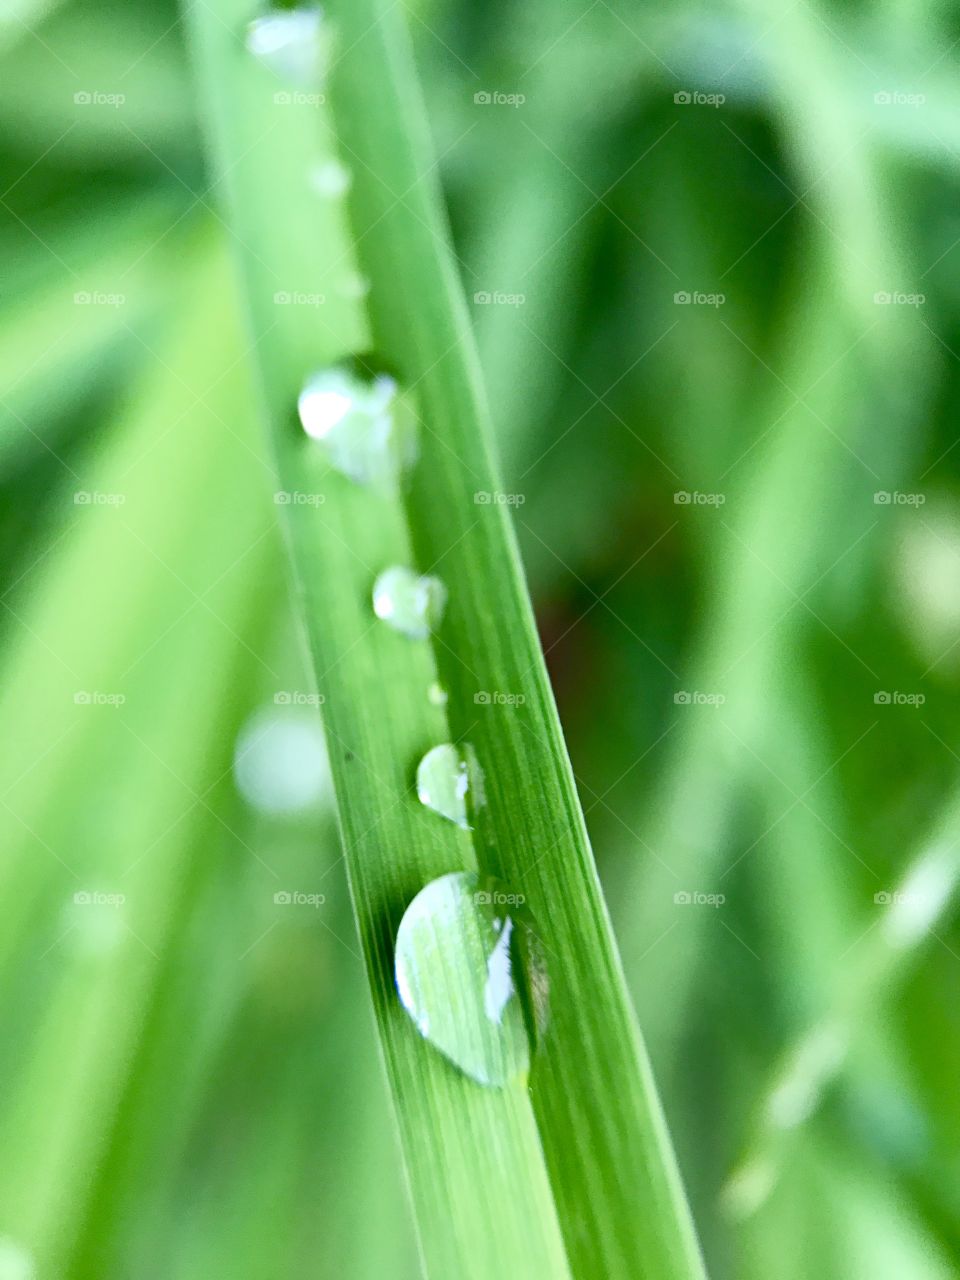 Drops of Sequence .#susanandjoel
These raindrops are in perfect sequence fun. Big small small big. Perfectly set apart on this piece of grass after the rain. With Macro
 you can see the beauty of mother nature for sure. Green green green 